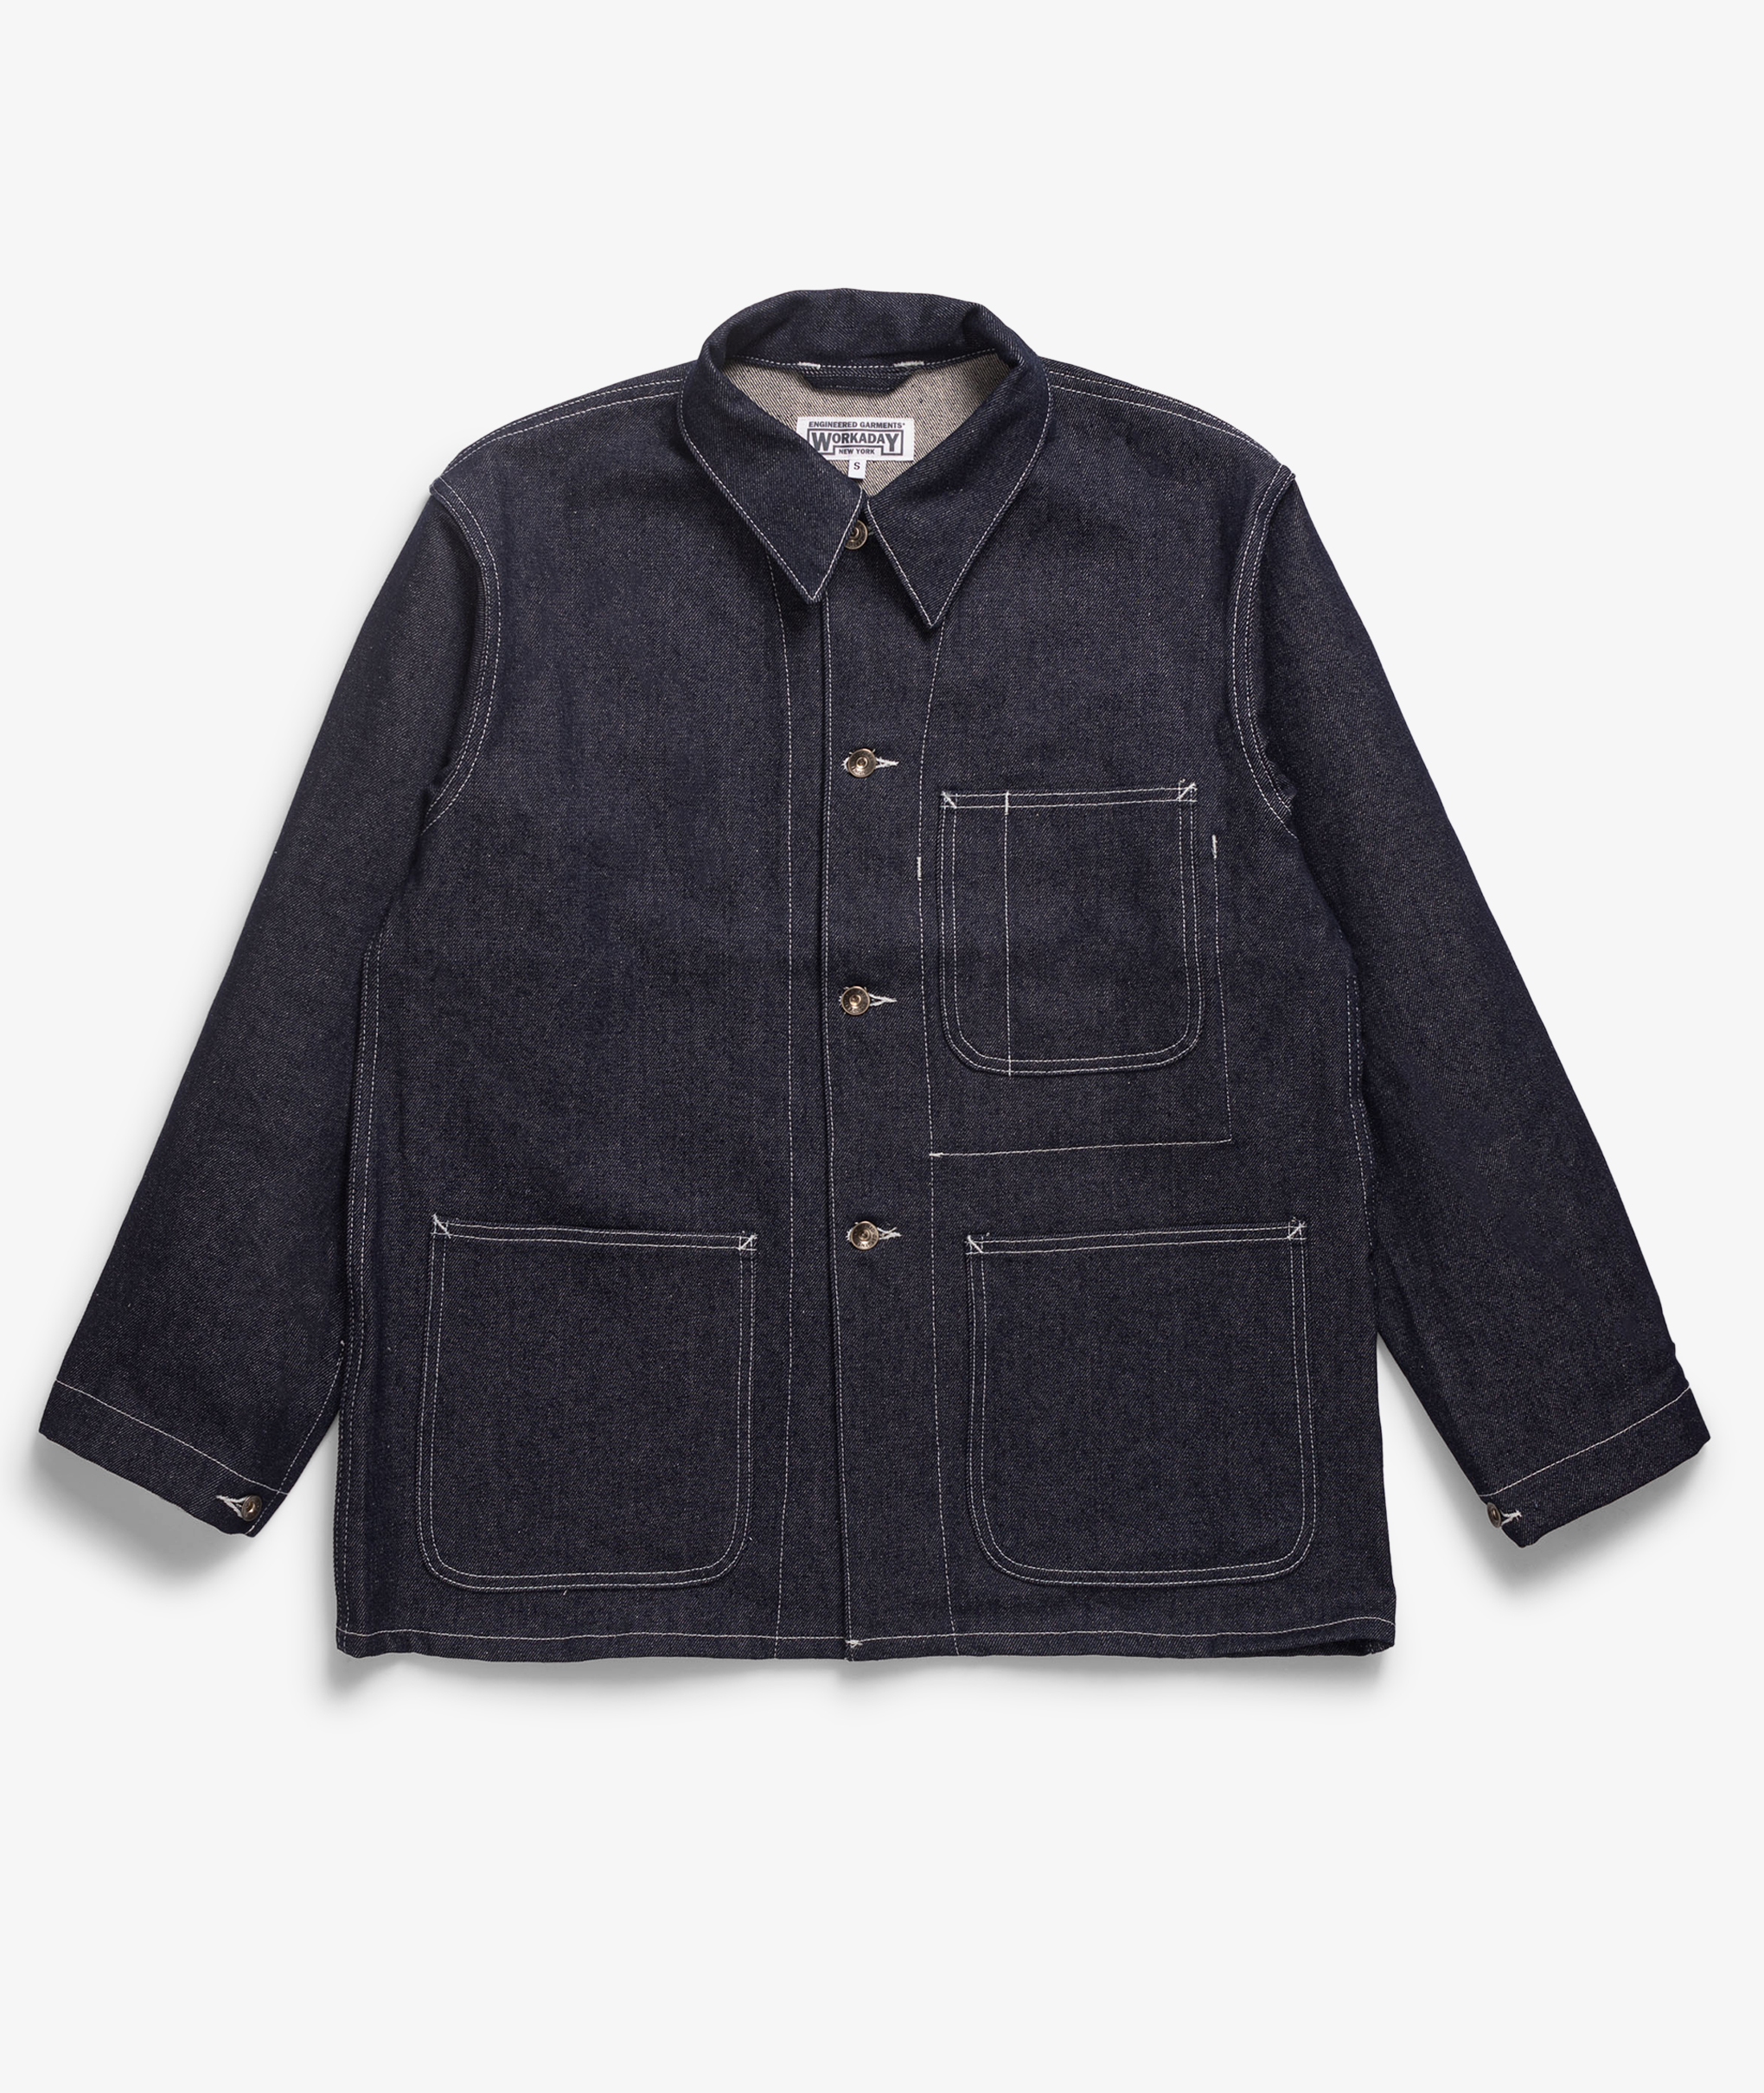 Norse Store | Shipping Worldwide - Engineered Garments WORKADAY Utility ...